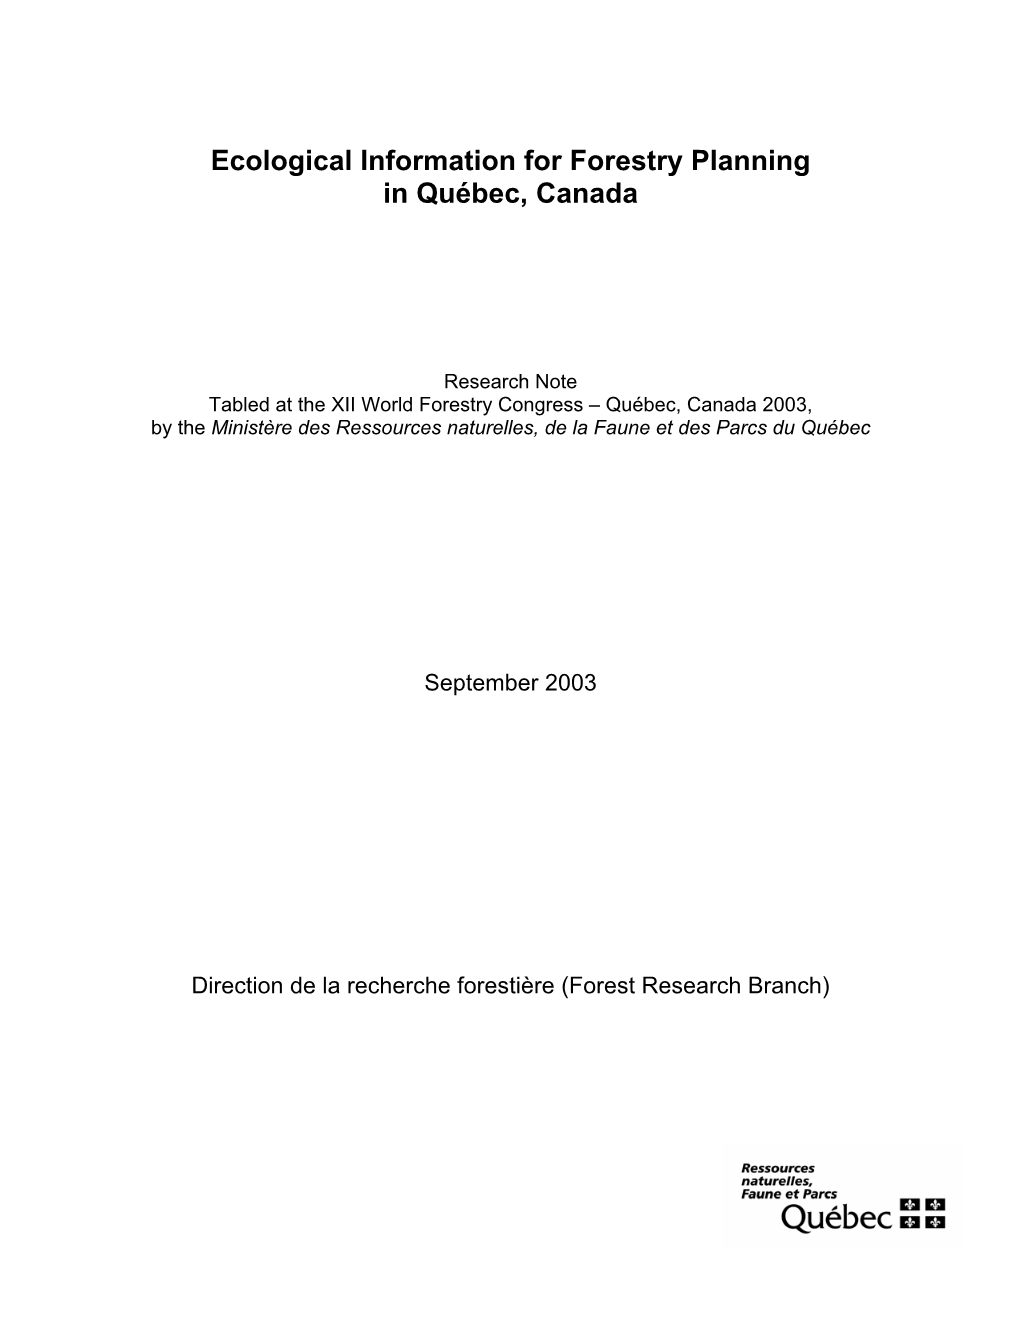 Ecological Information for Forestry Planning in Québec, Canada